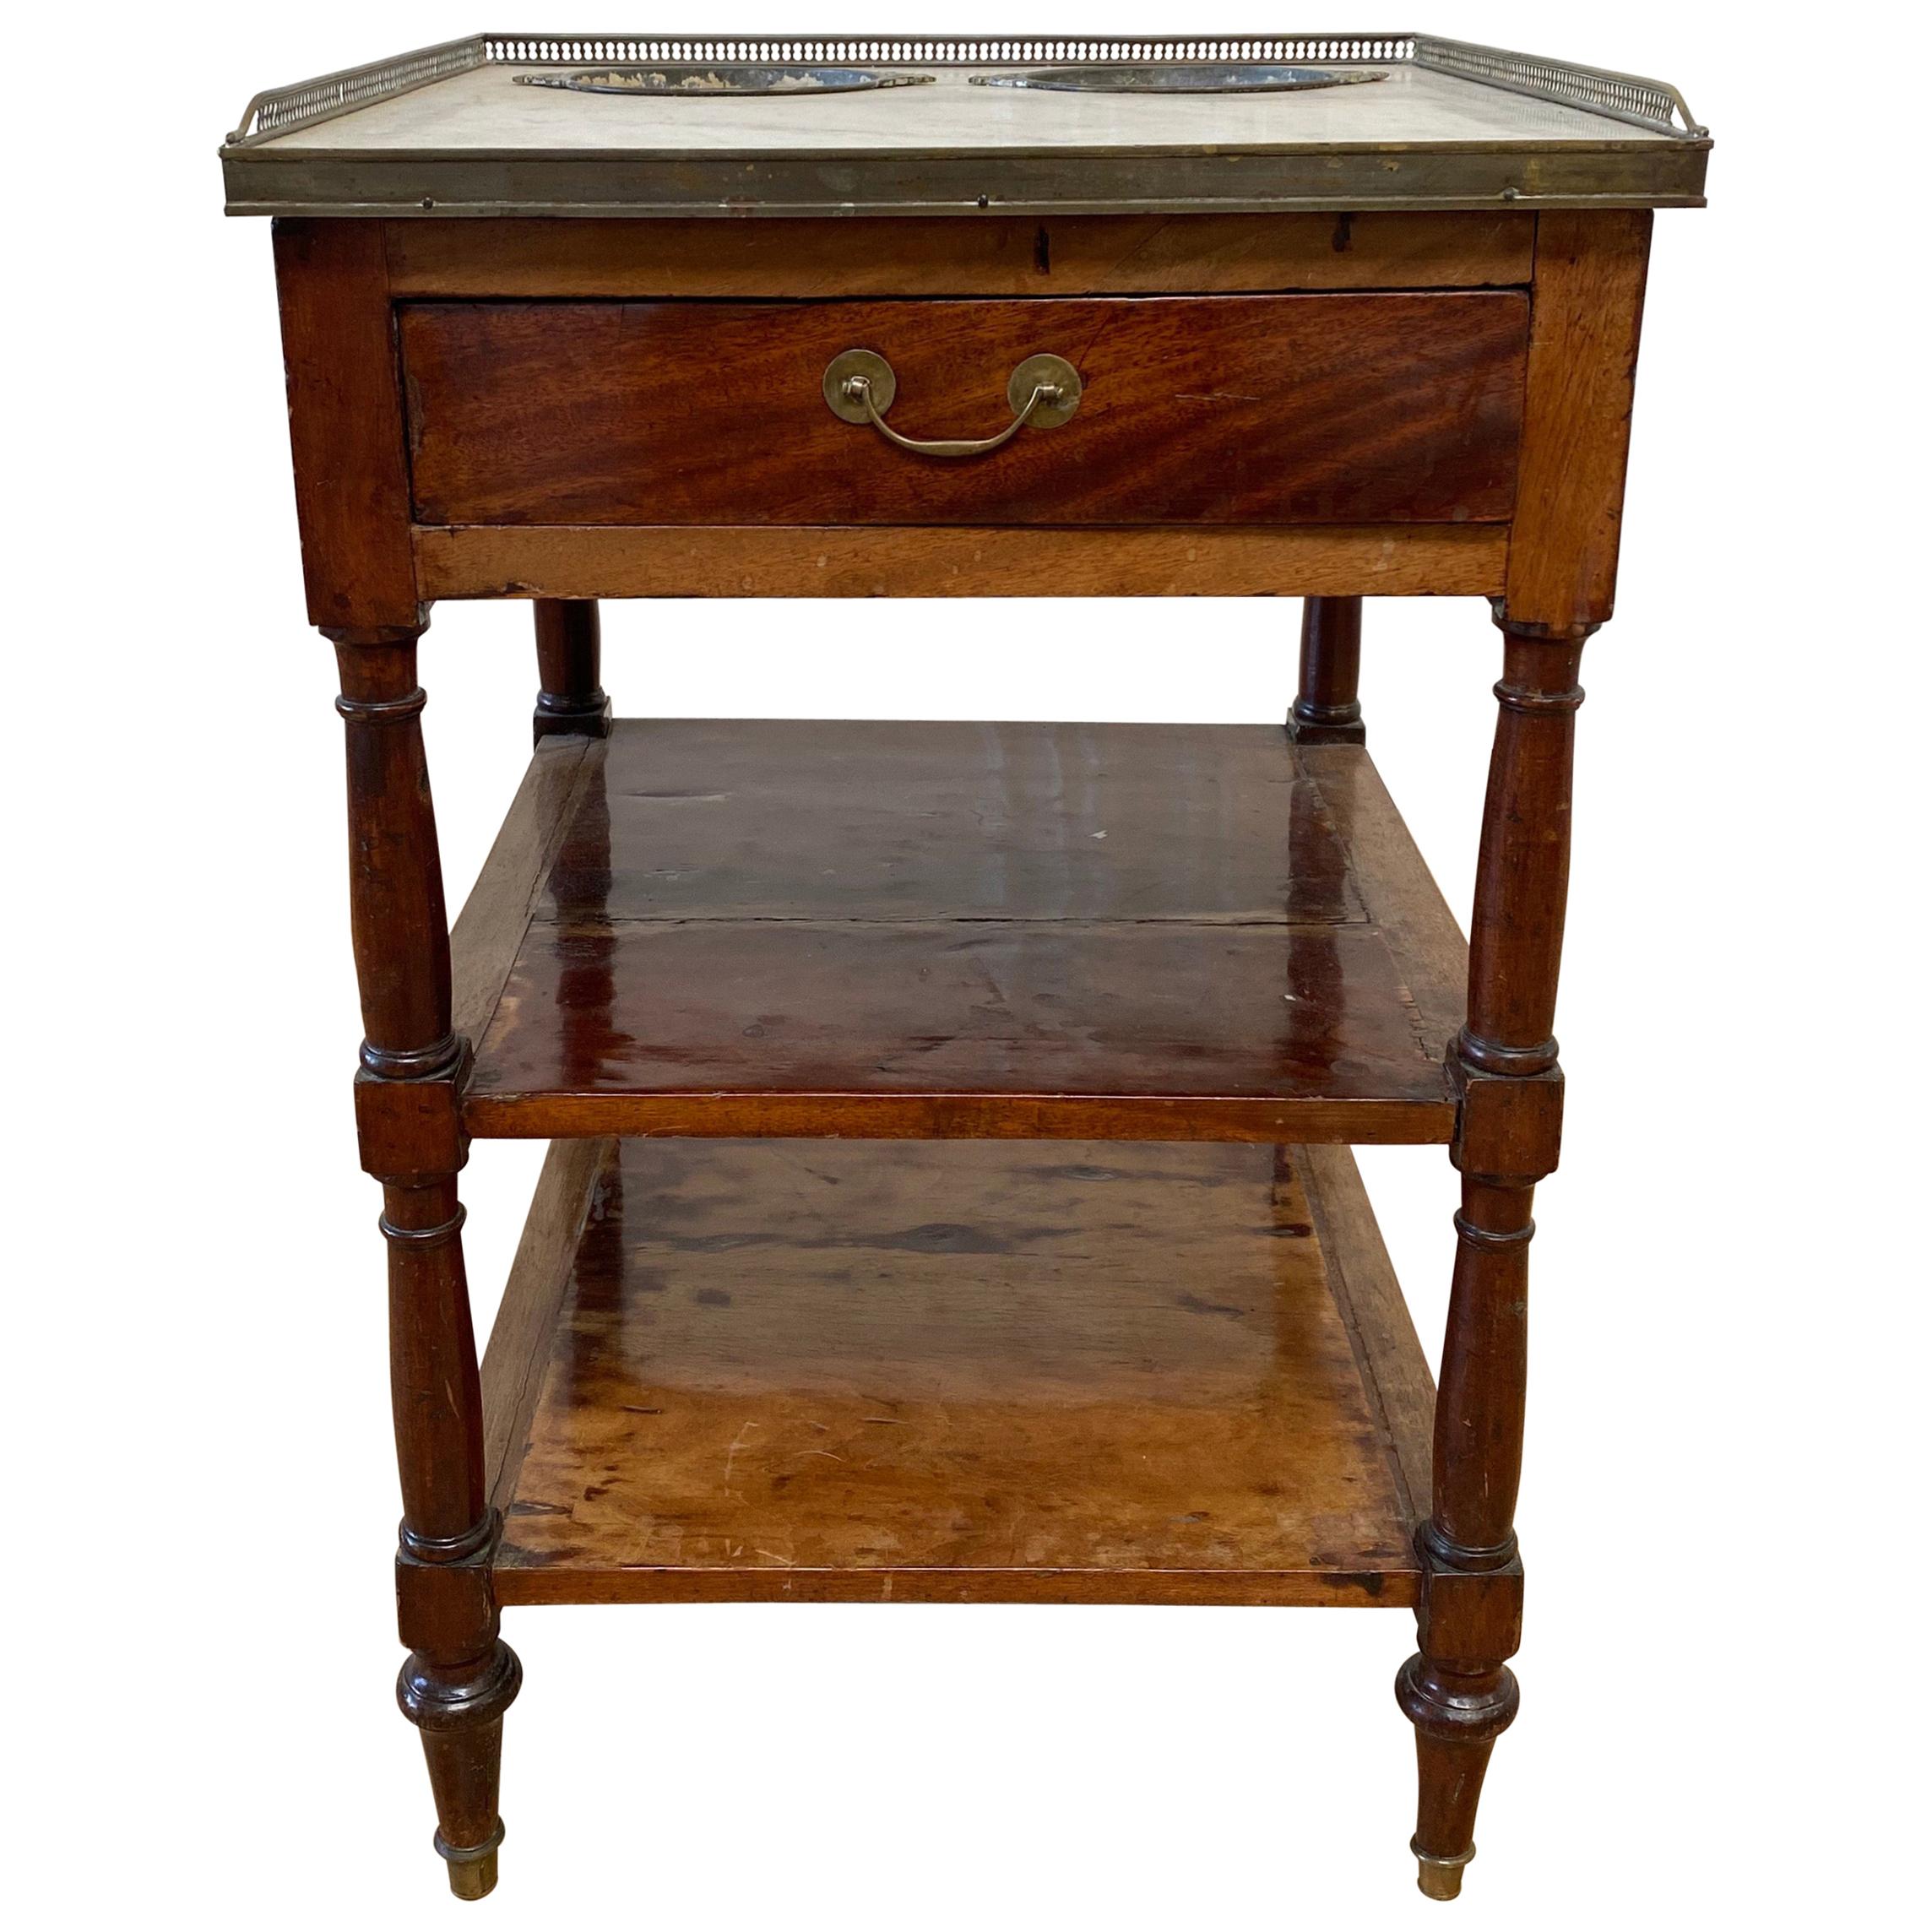 19th Century English Shaving Table with Marble Top